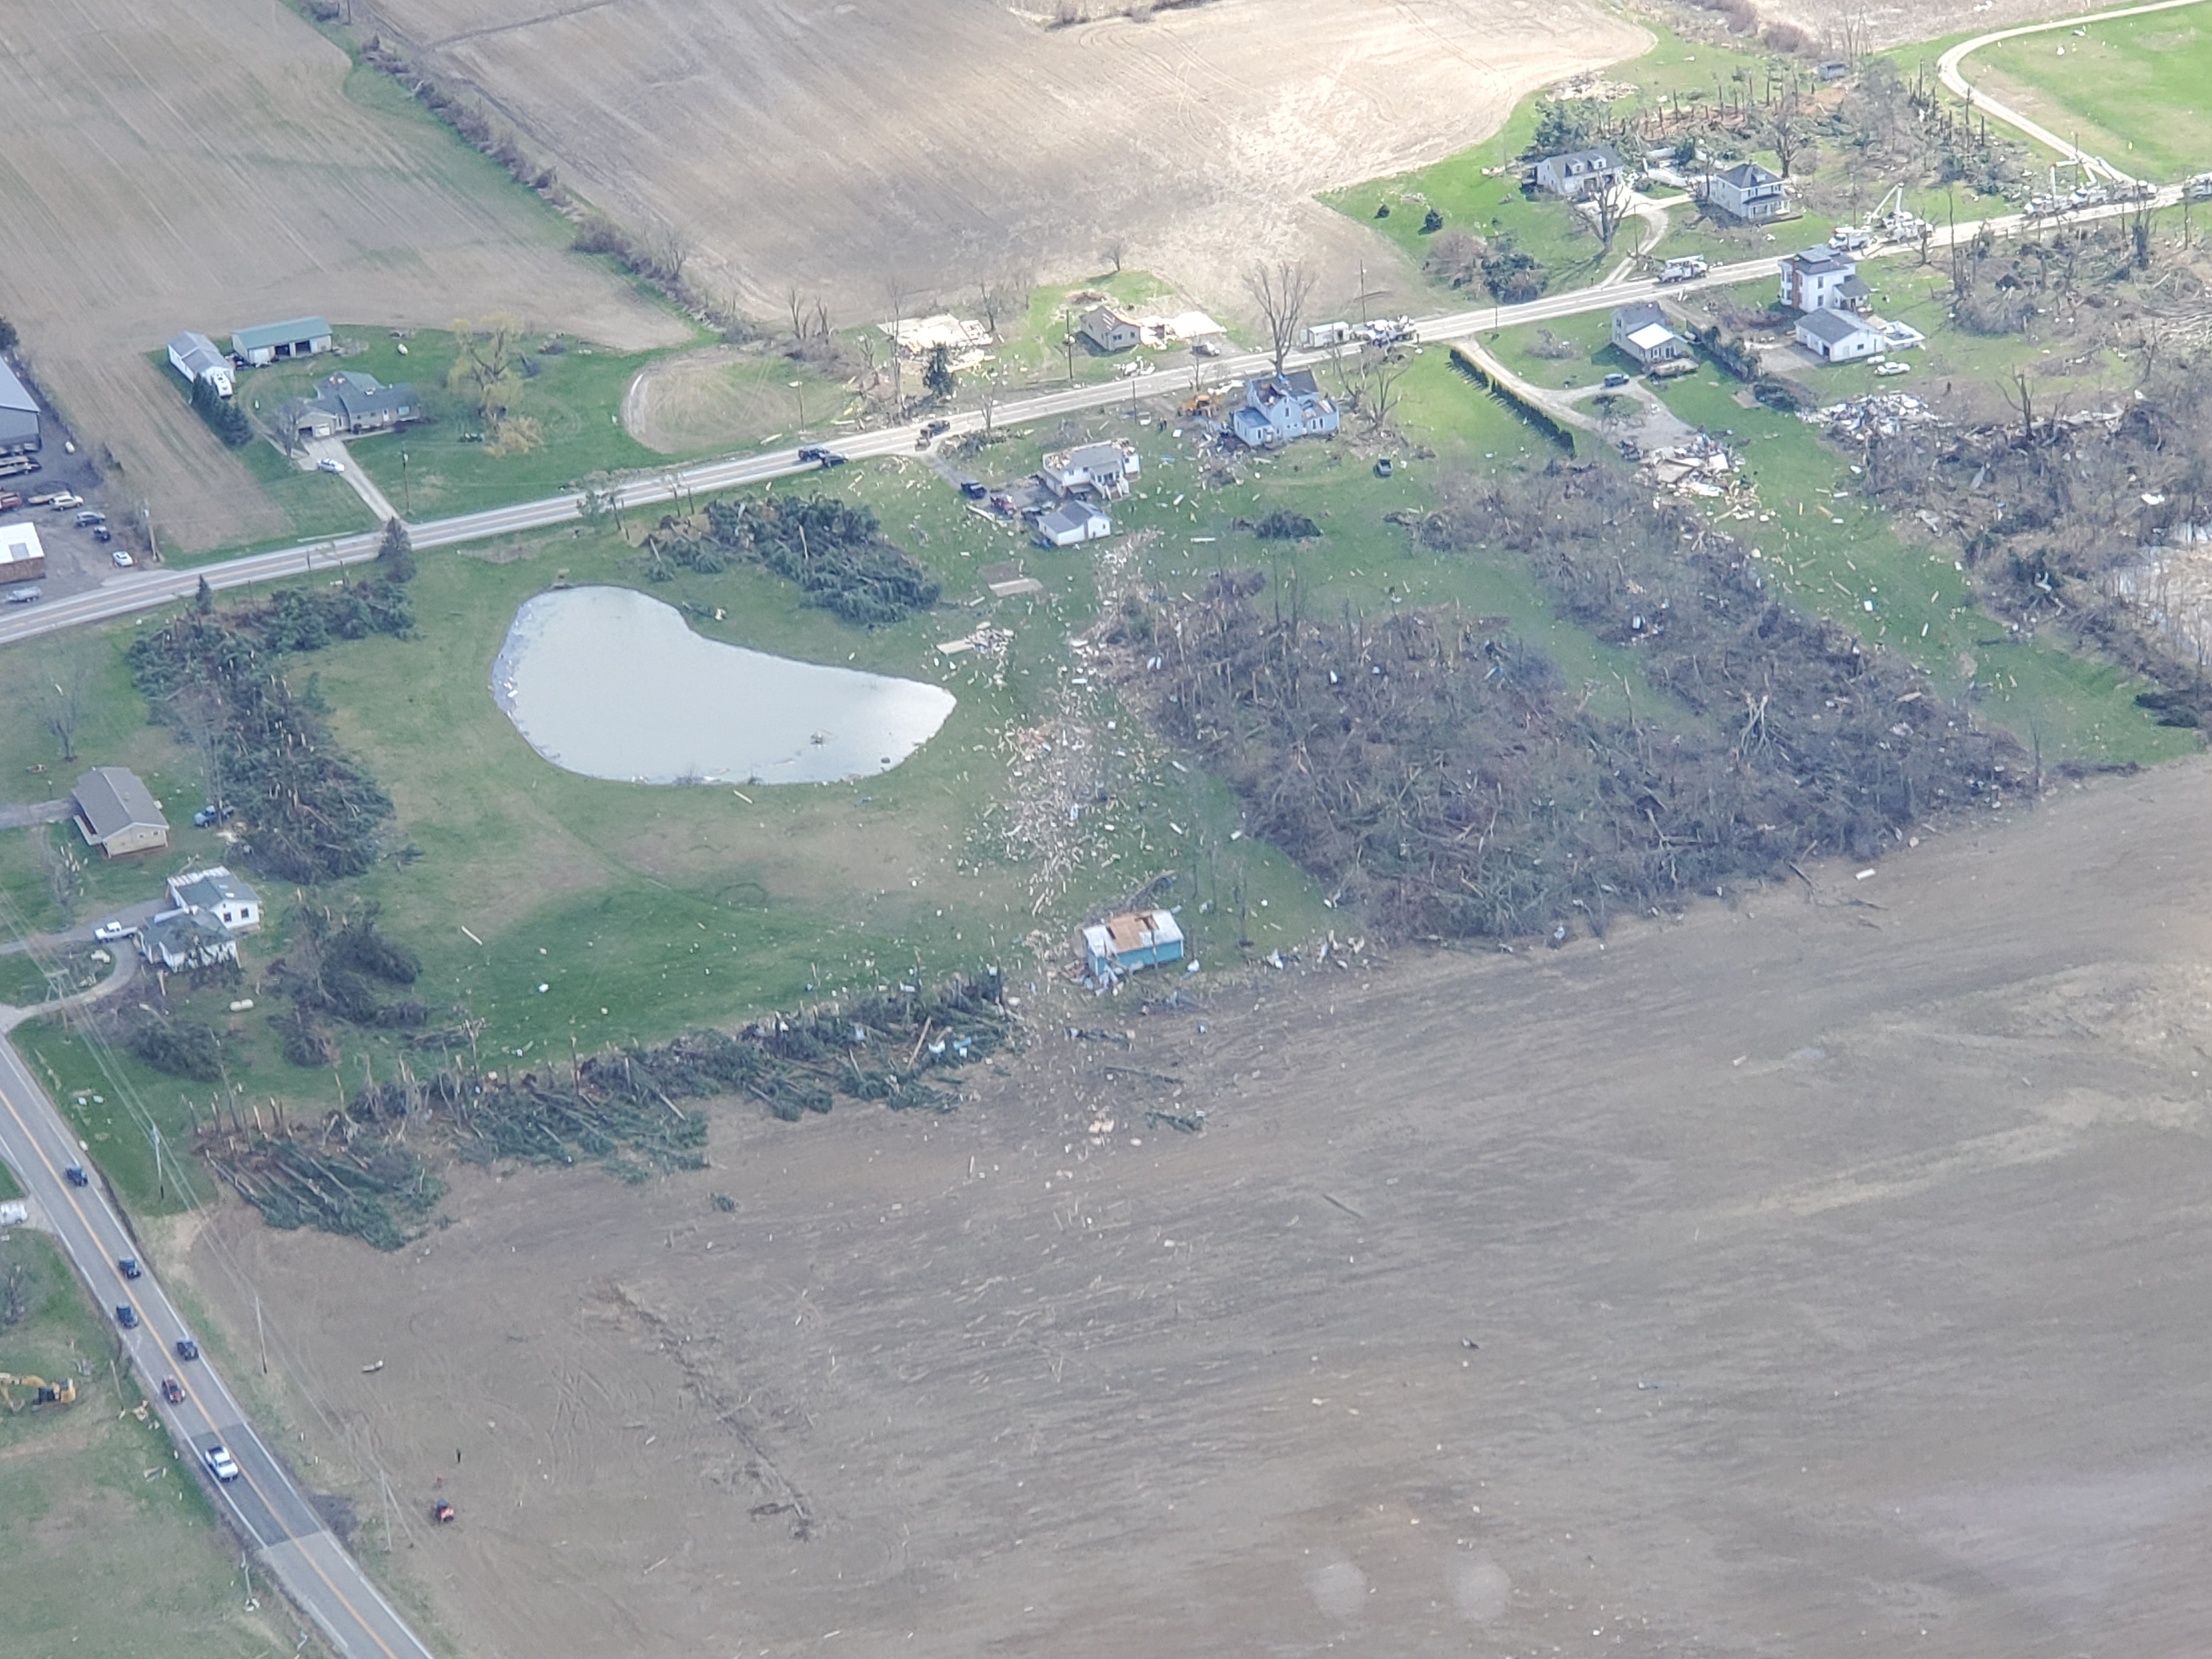 flyover photos courtesy of WEWS Brian Shaw Shelby, OH April 14, 2019